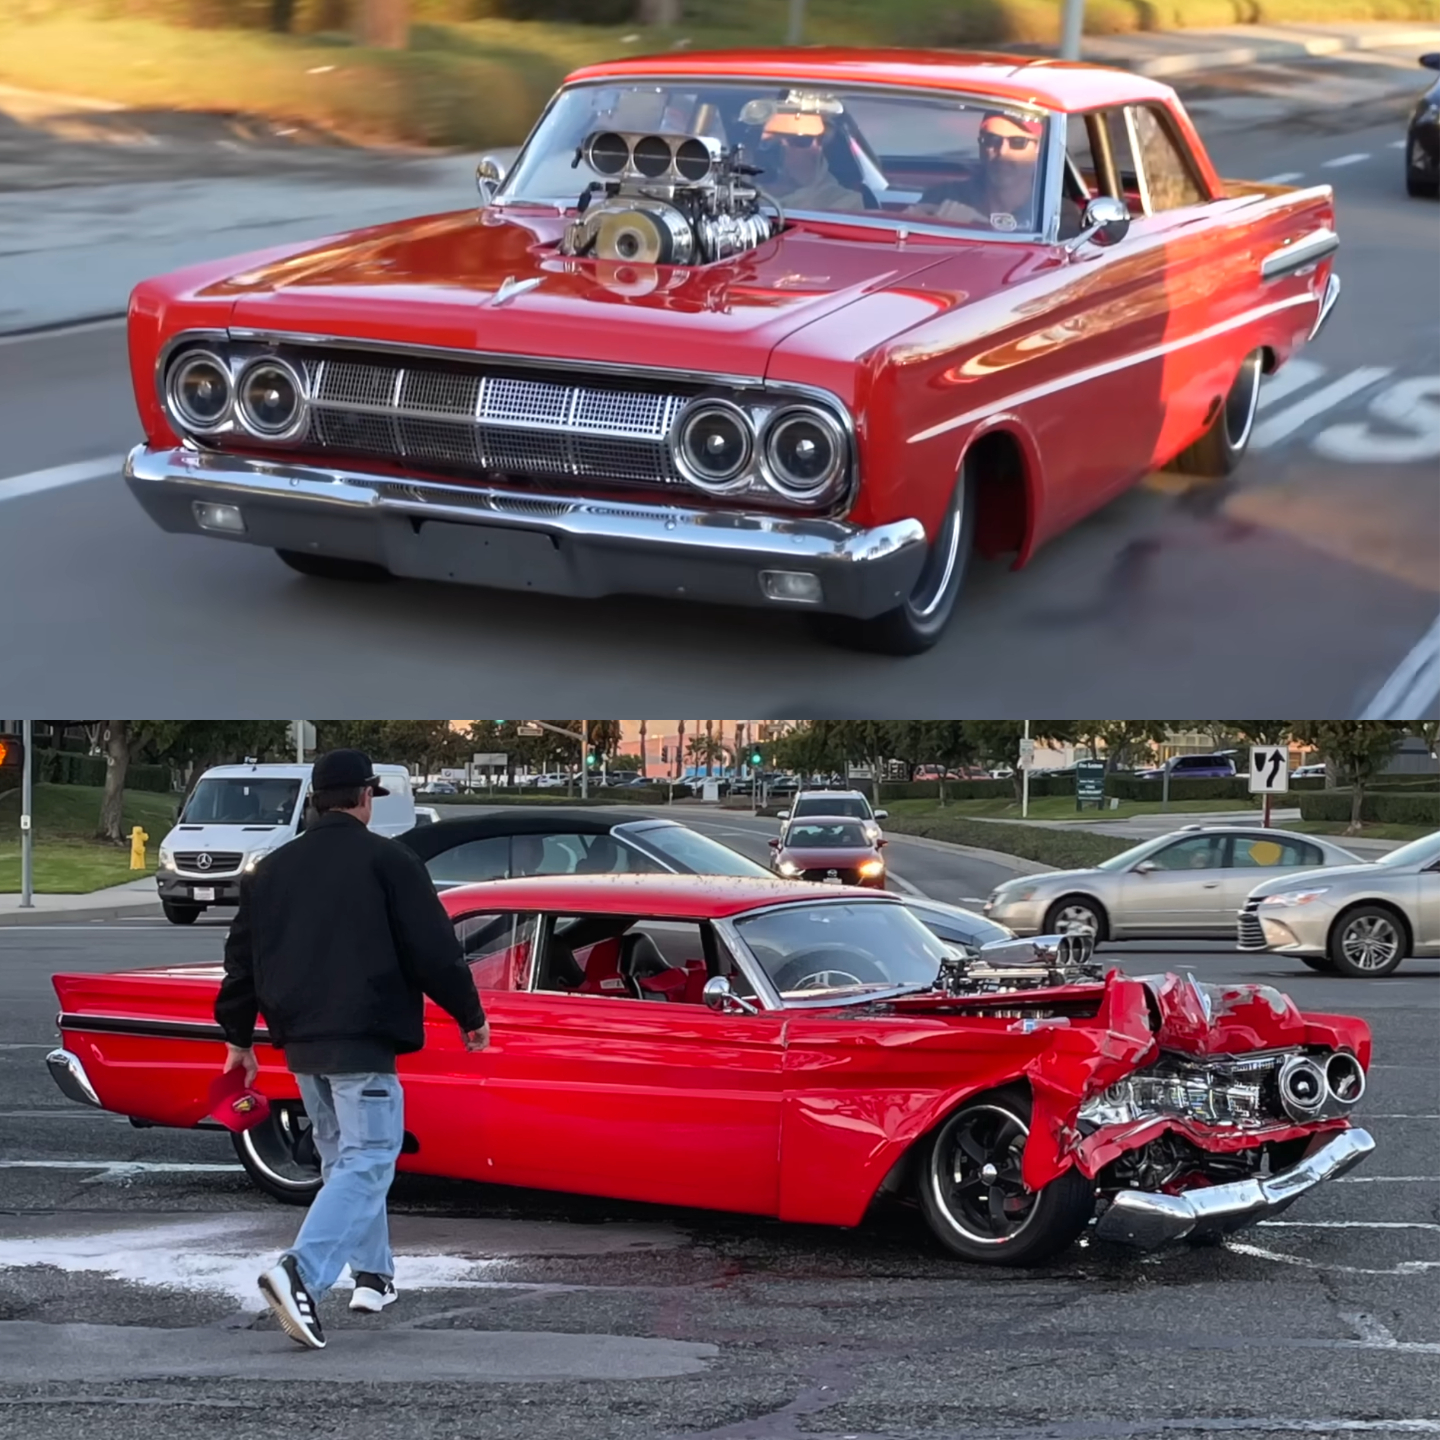 The 1,300 hp Mercury Comet before and after the car accident